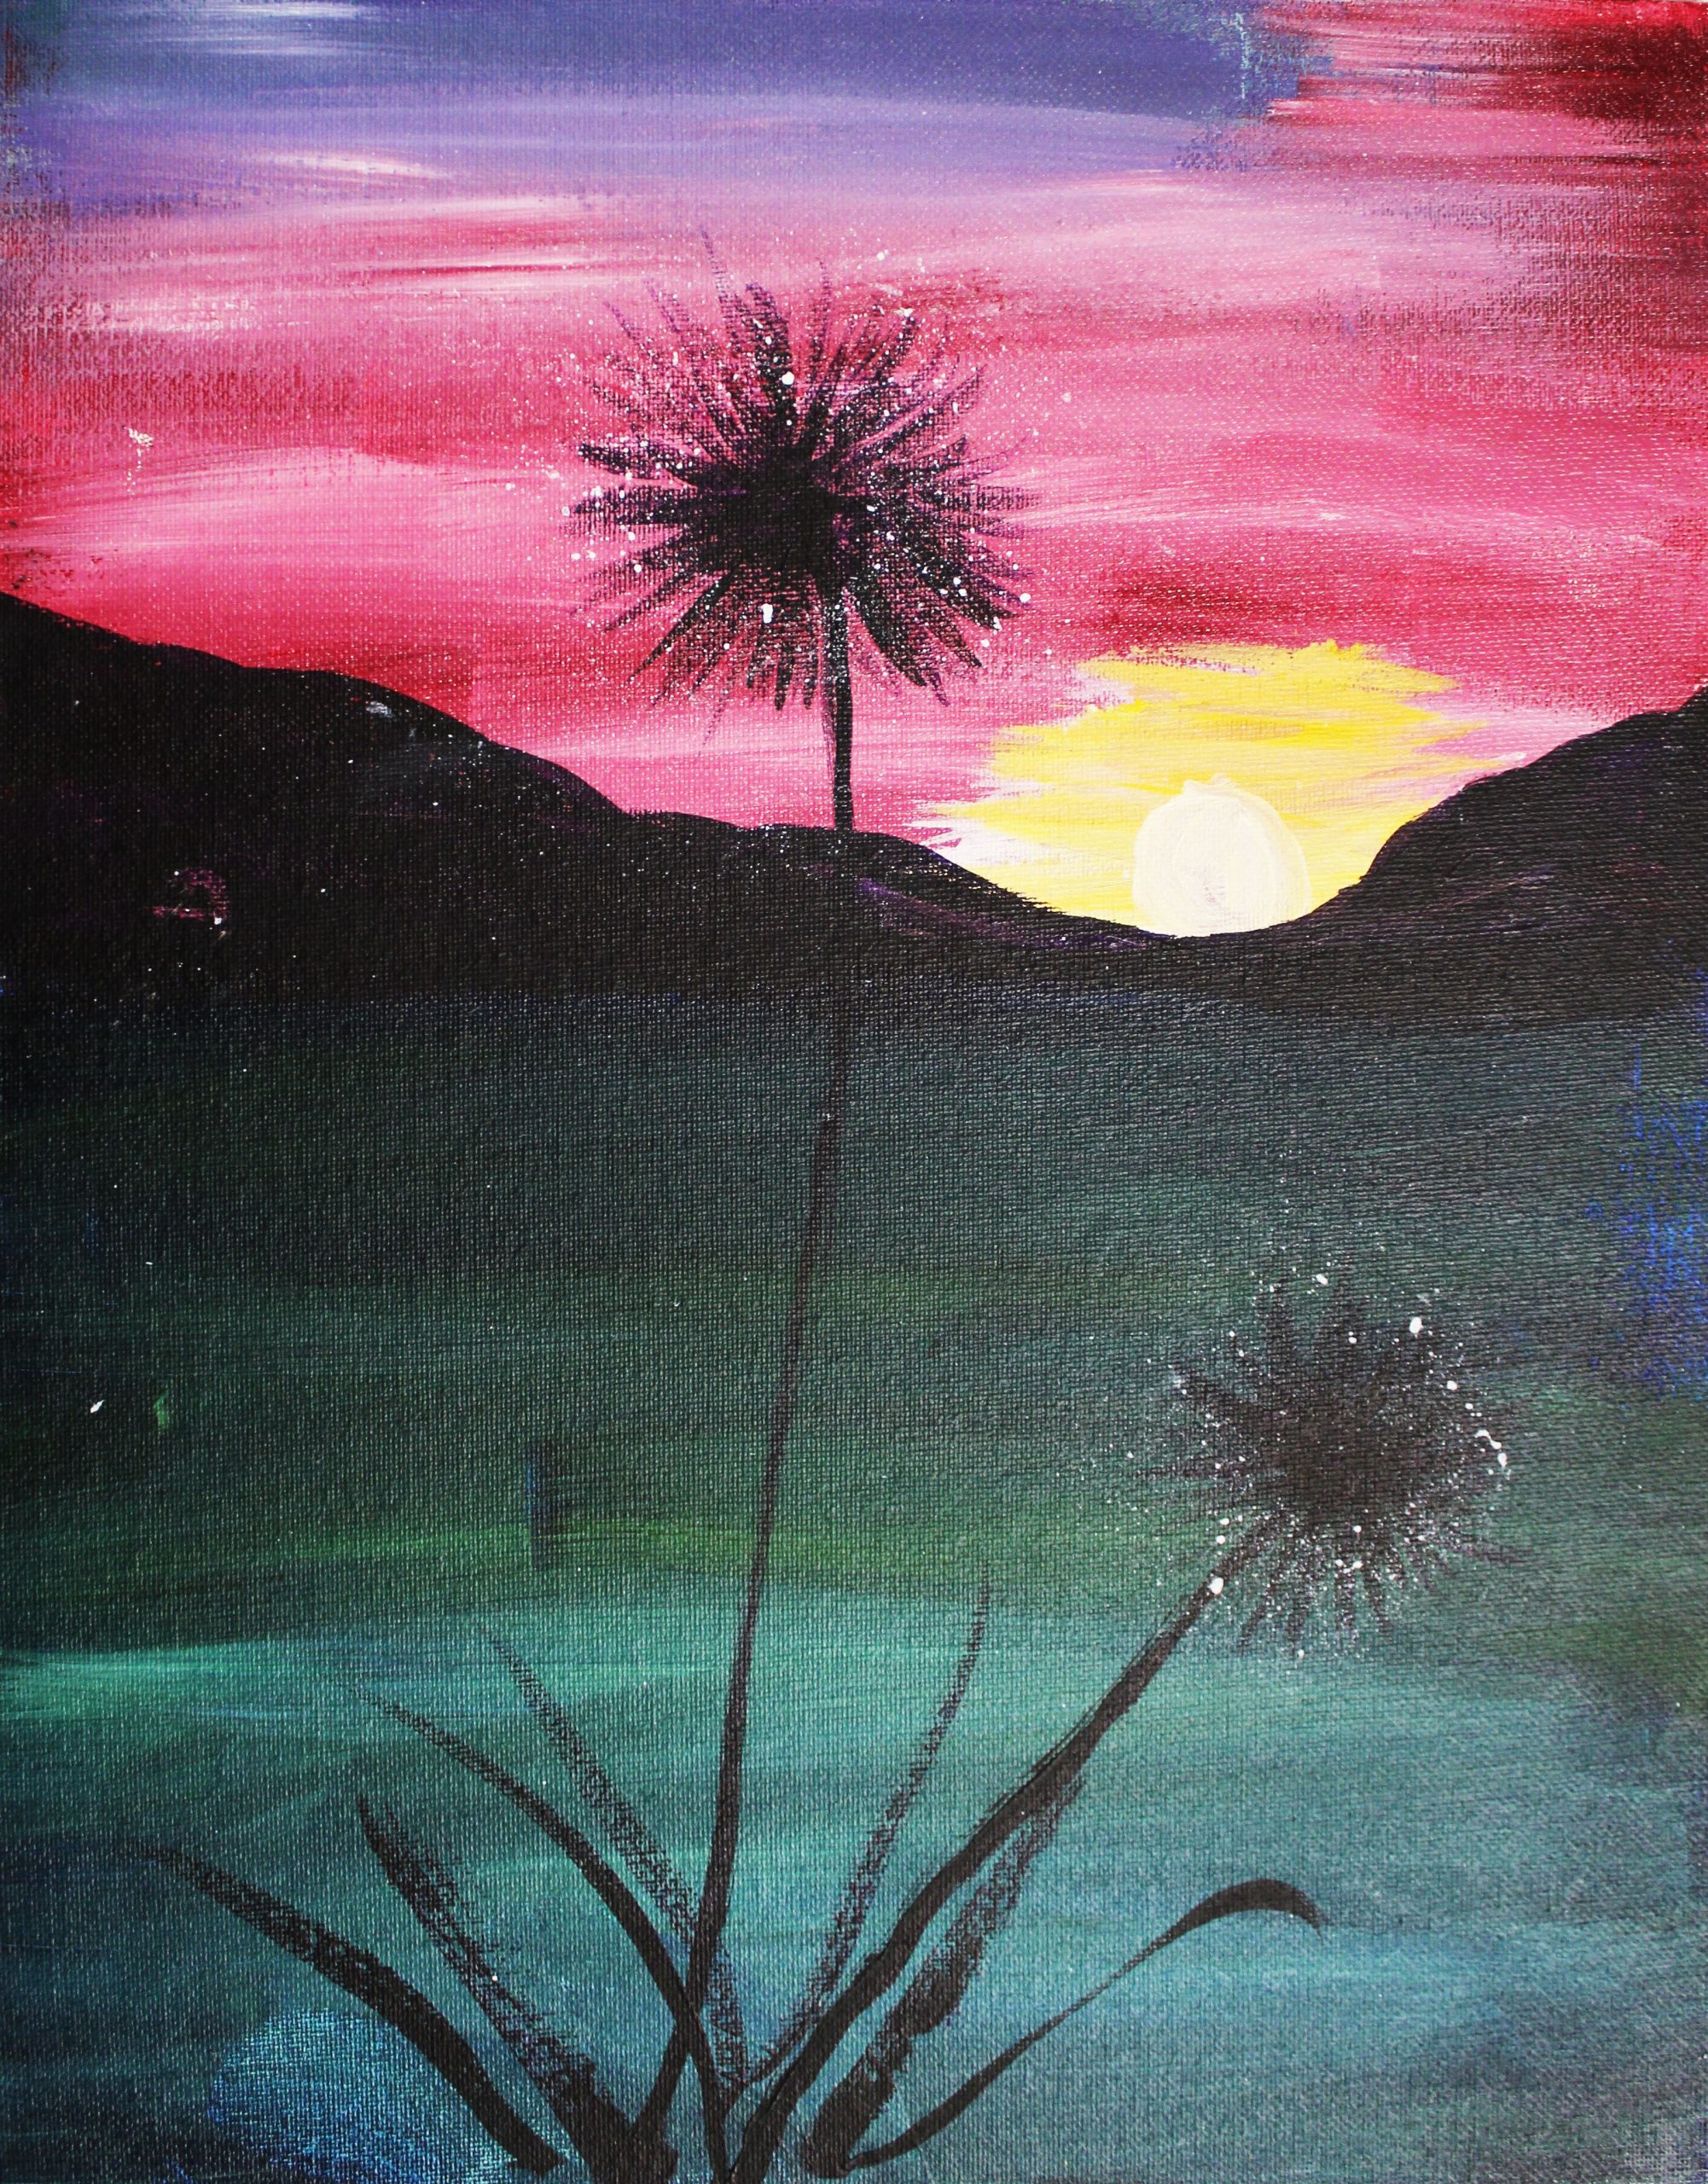 My Weekend Creative Project: Painting Watercolor Sunsets – Divine NY & Co.